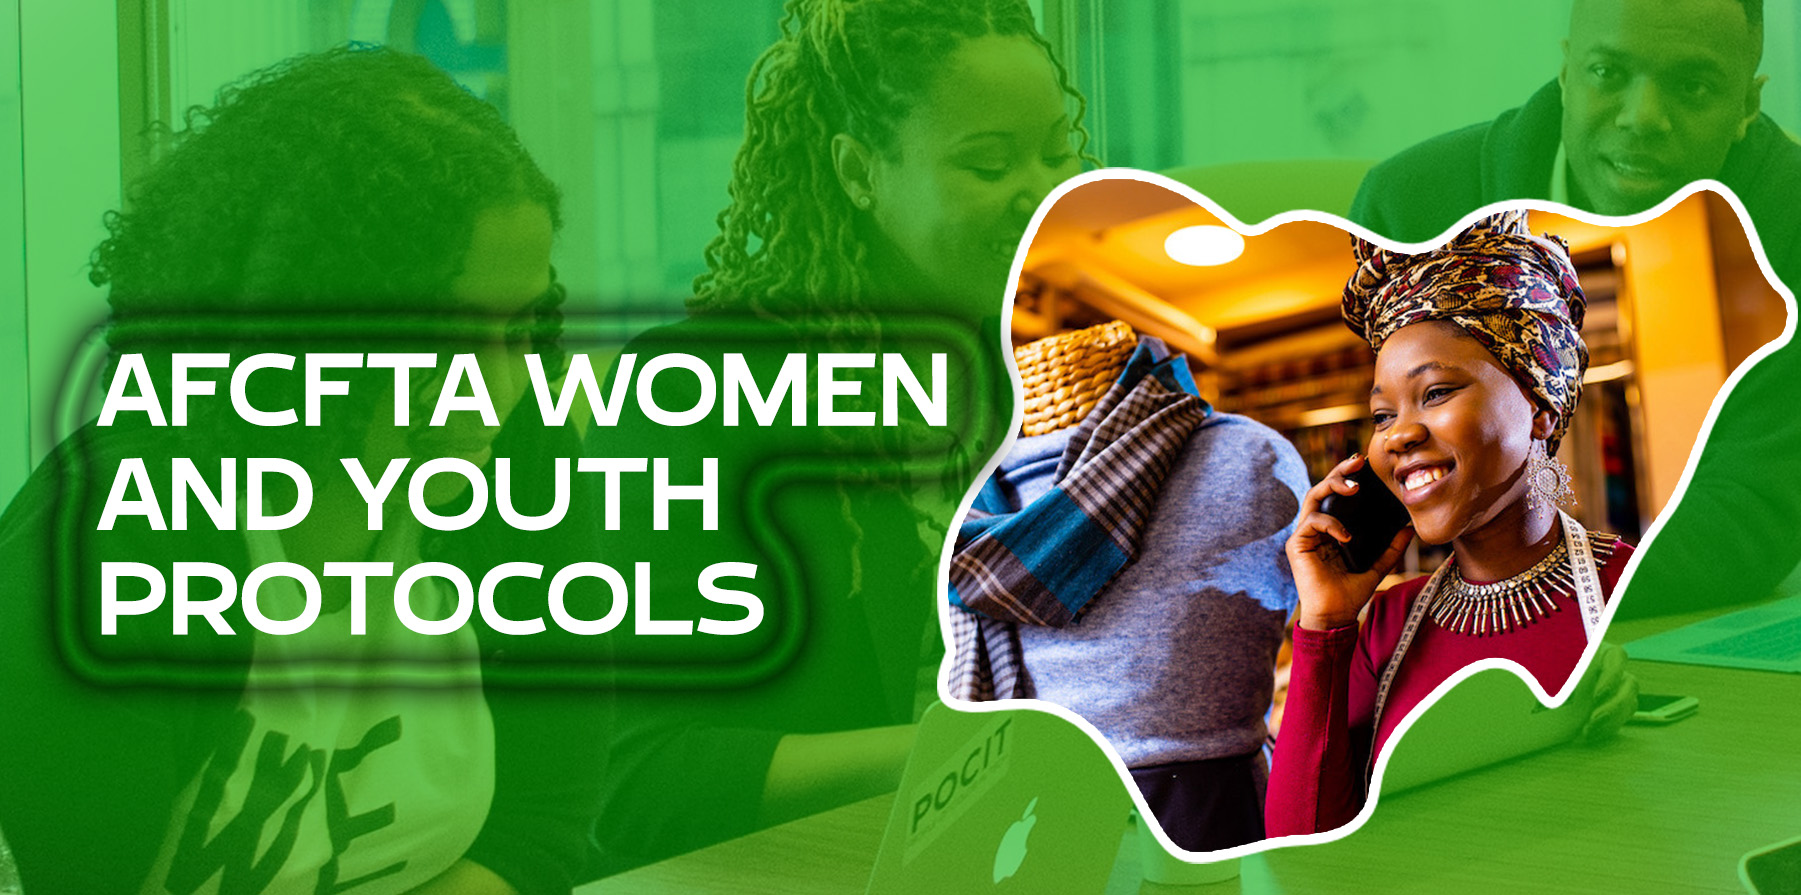 AfCFTA YOUTH AND WOMEN PROTOCOL